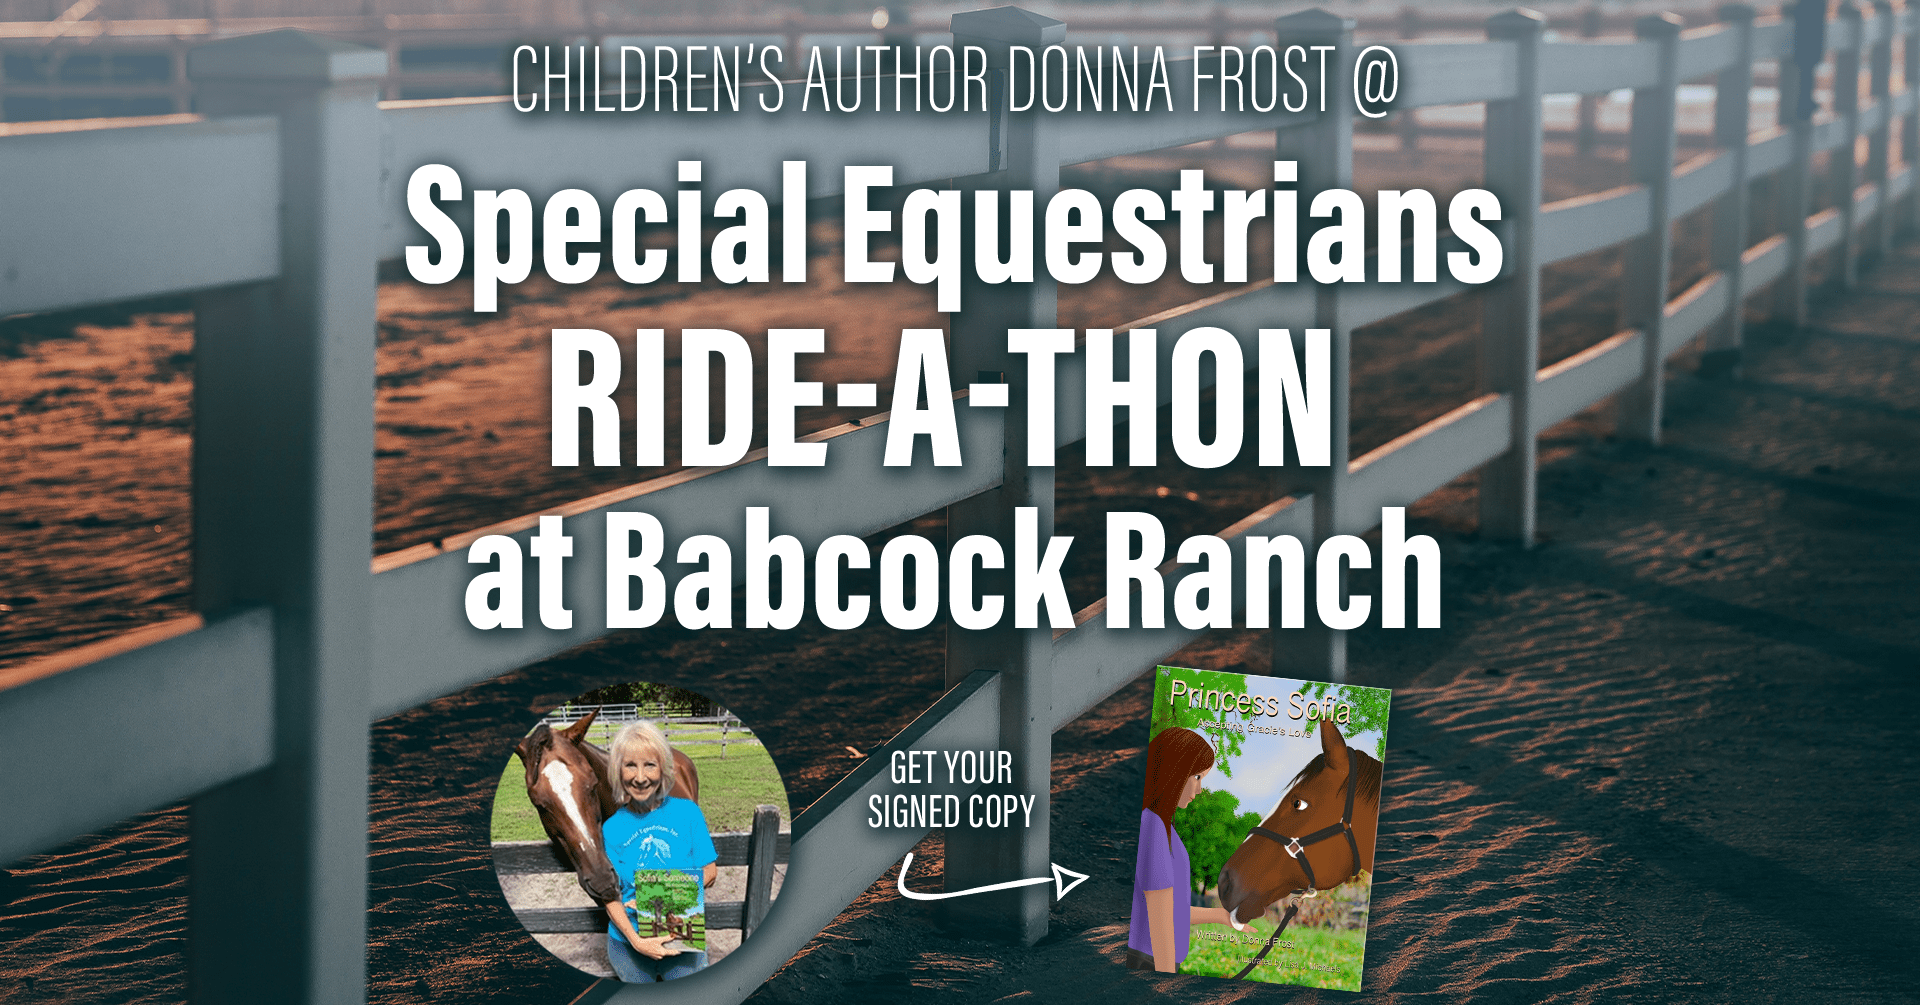 Donna Frost Special Equestrian Ride-A-Thon at Babcock Ranch